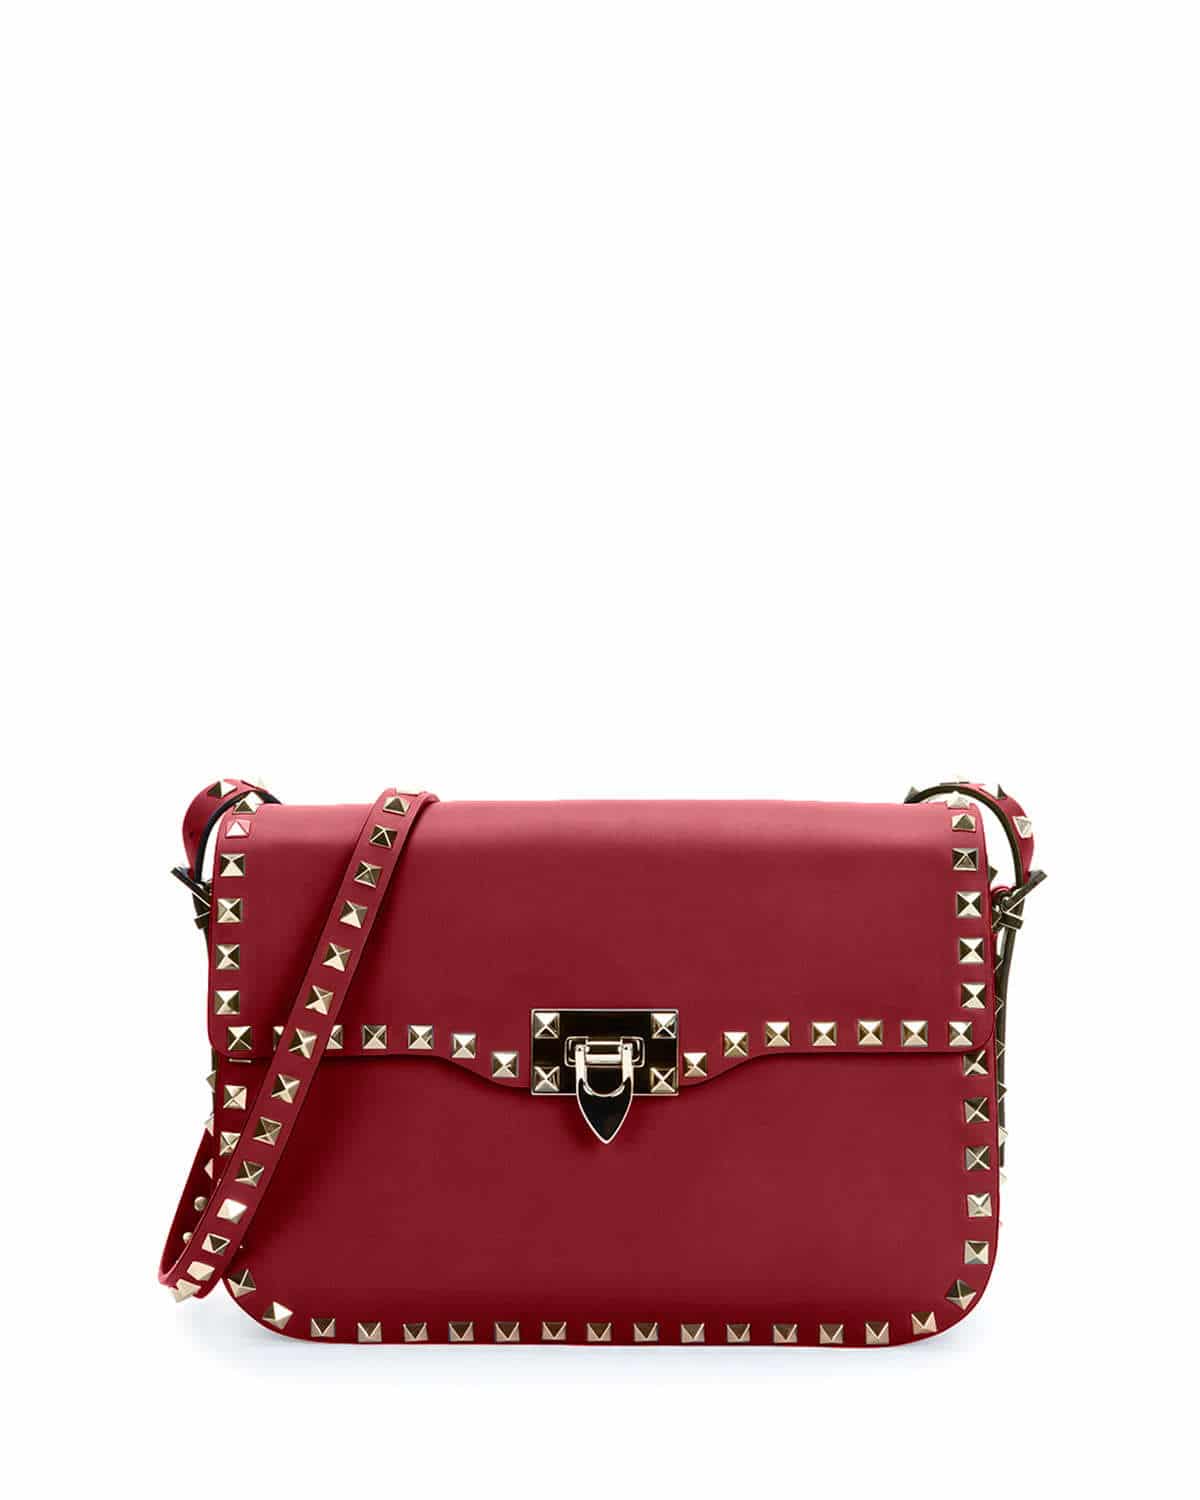 Valentino Pre-Fall 2015 Bag Collection Featuring New B-Rockstud ...